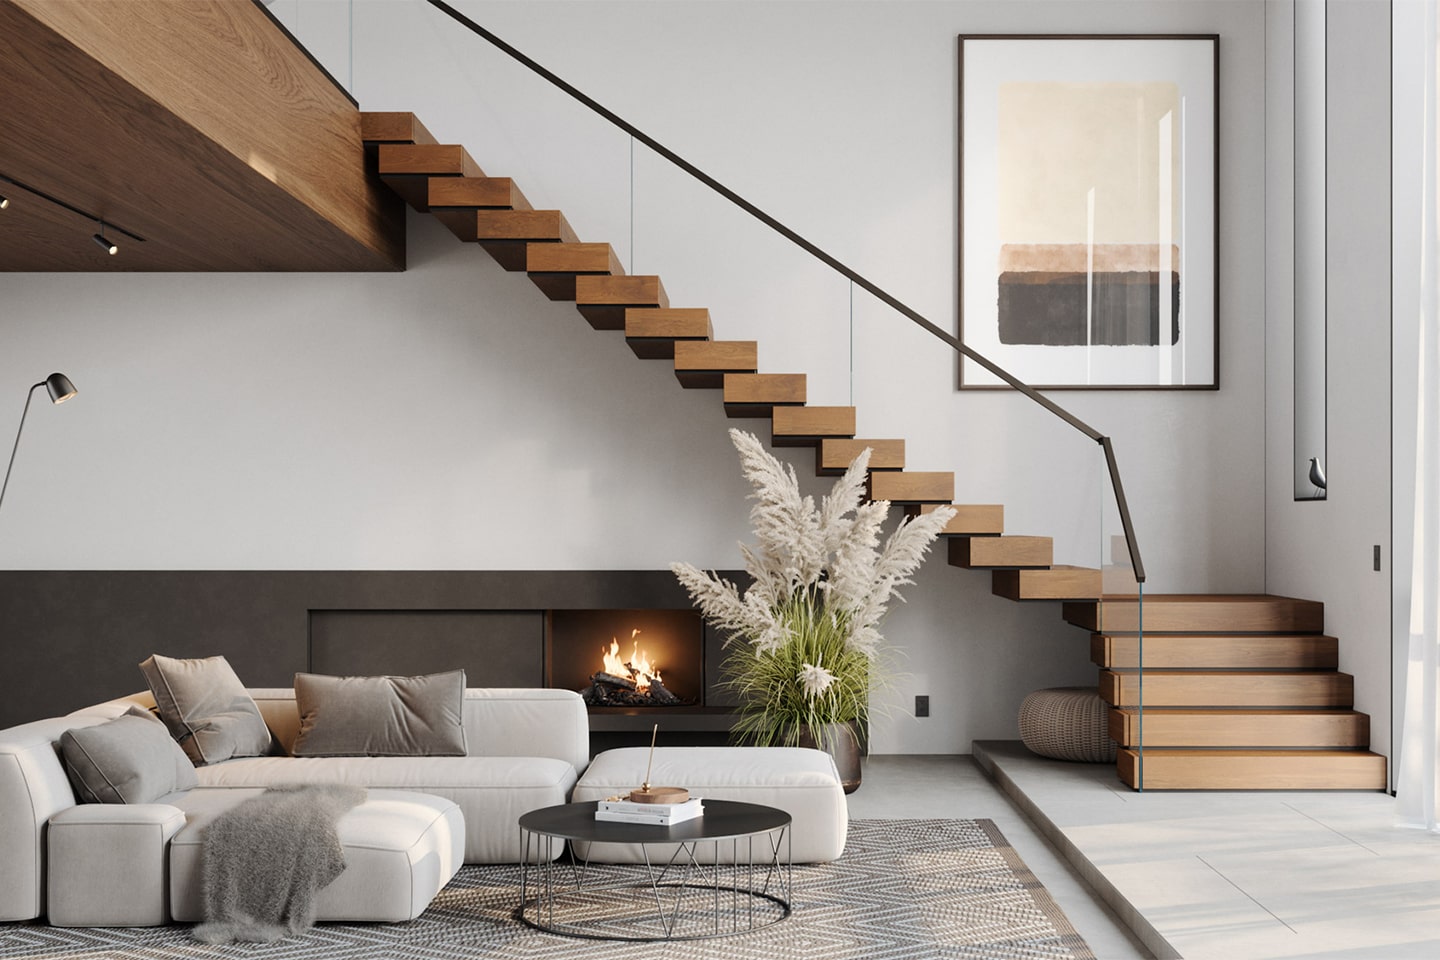 Floating stairs in a warm, bright, modern space.